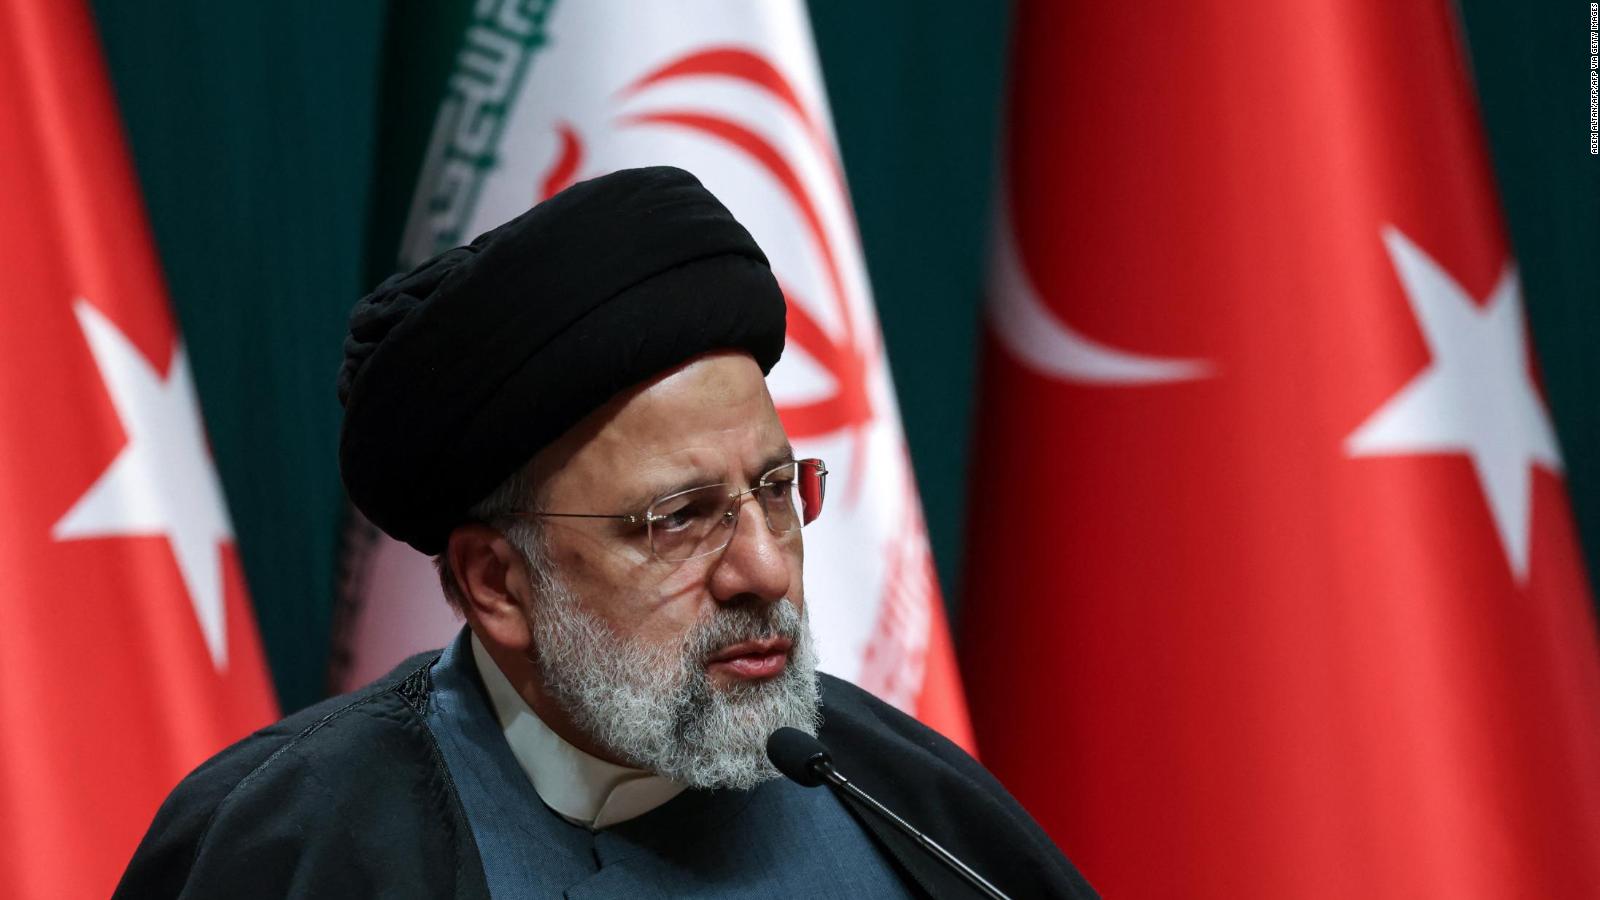 This Monday, May 20 news summary of the death of Iranian President Raisi in a helicopter crash